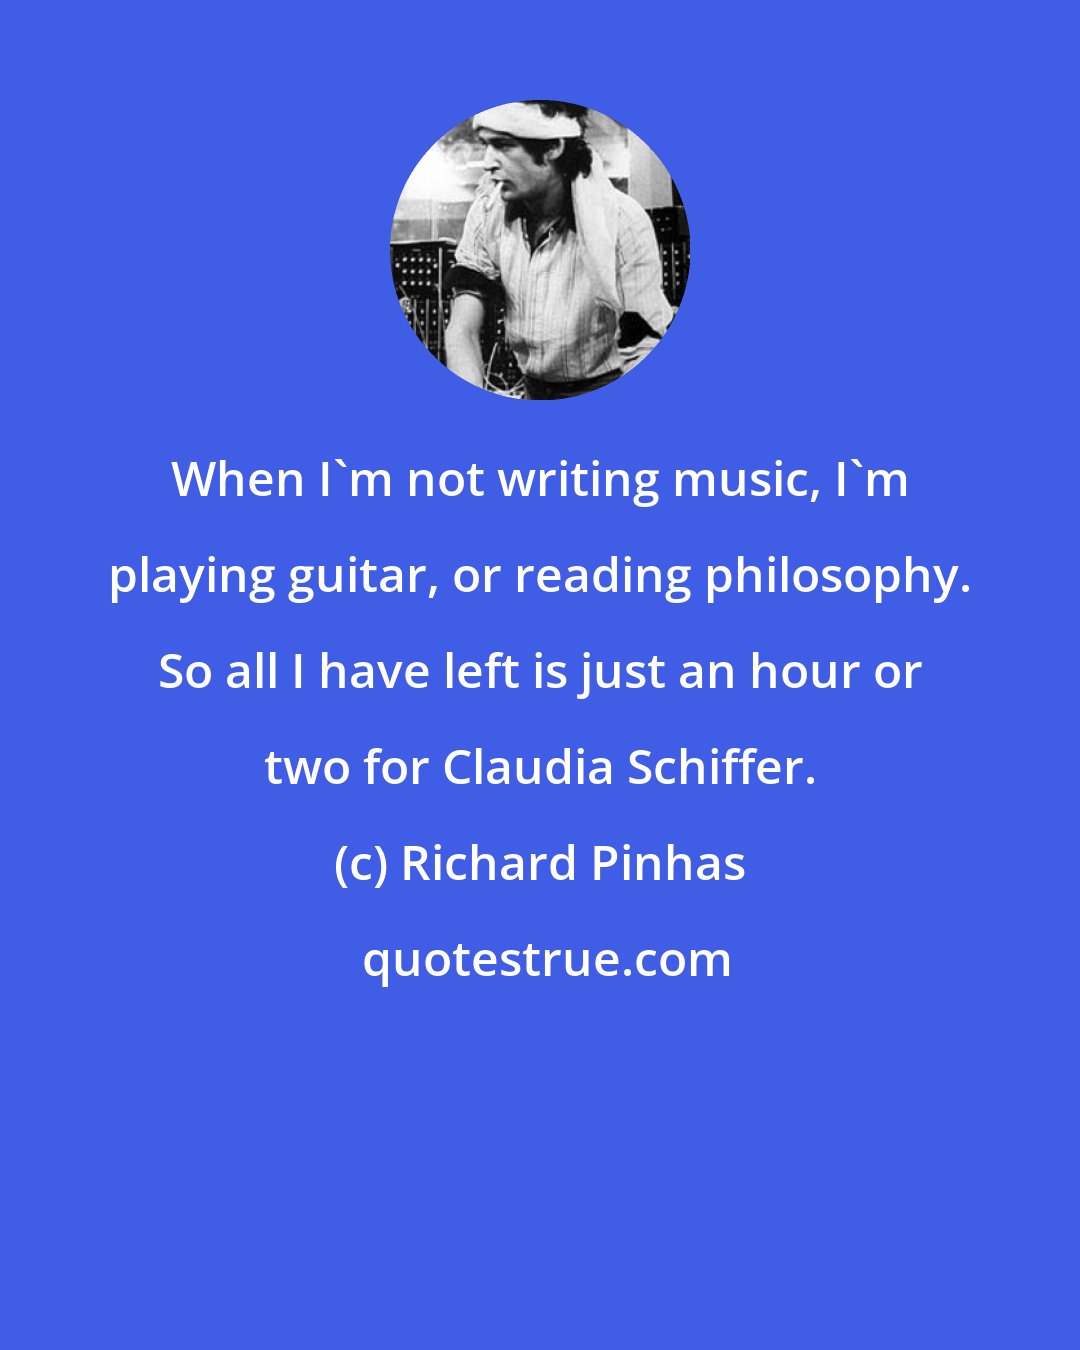 Richard Pinhas: When I'm not writing music, I'm playing guitar, or reading philosophy. So all I have left is just an hour or two for Claudia Schiffer.